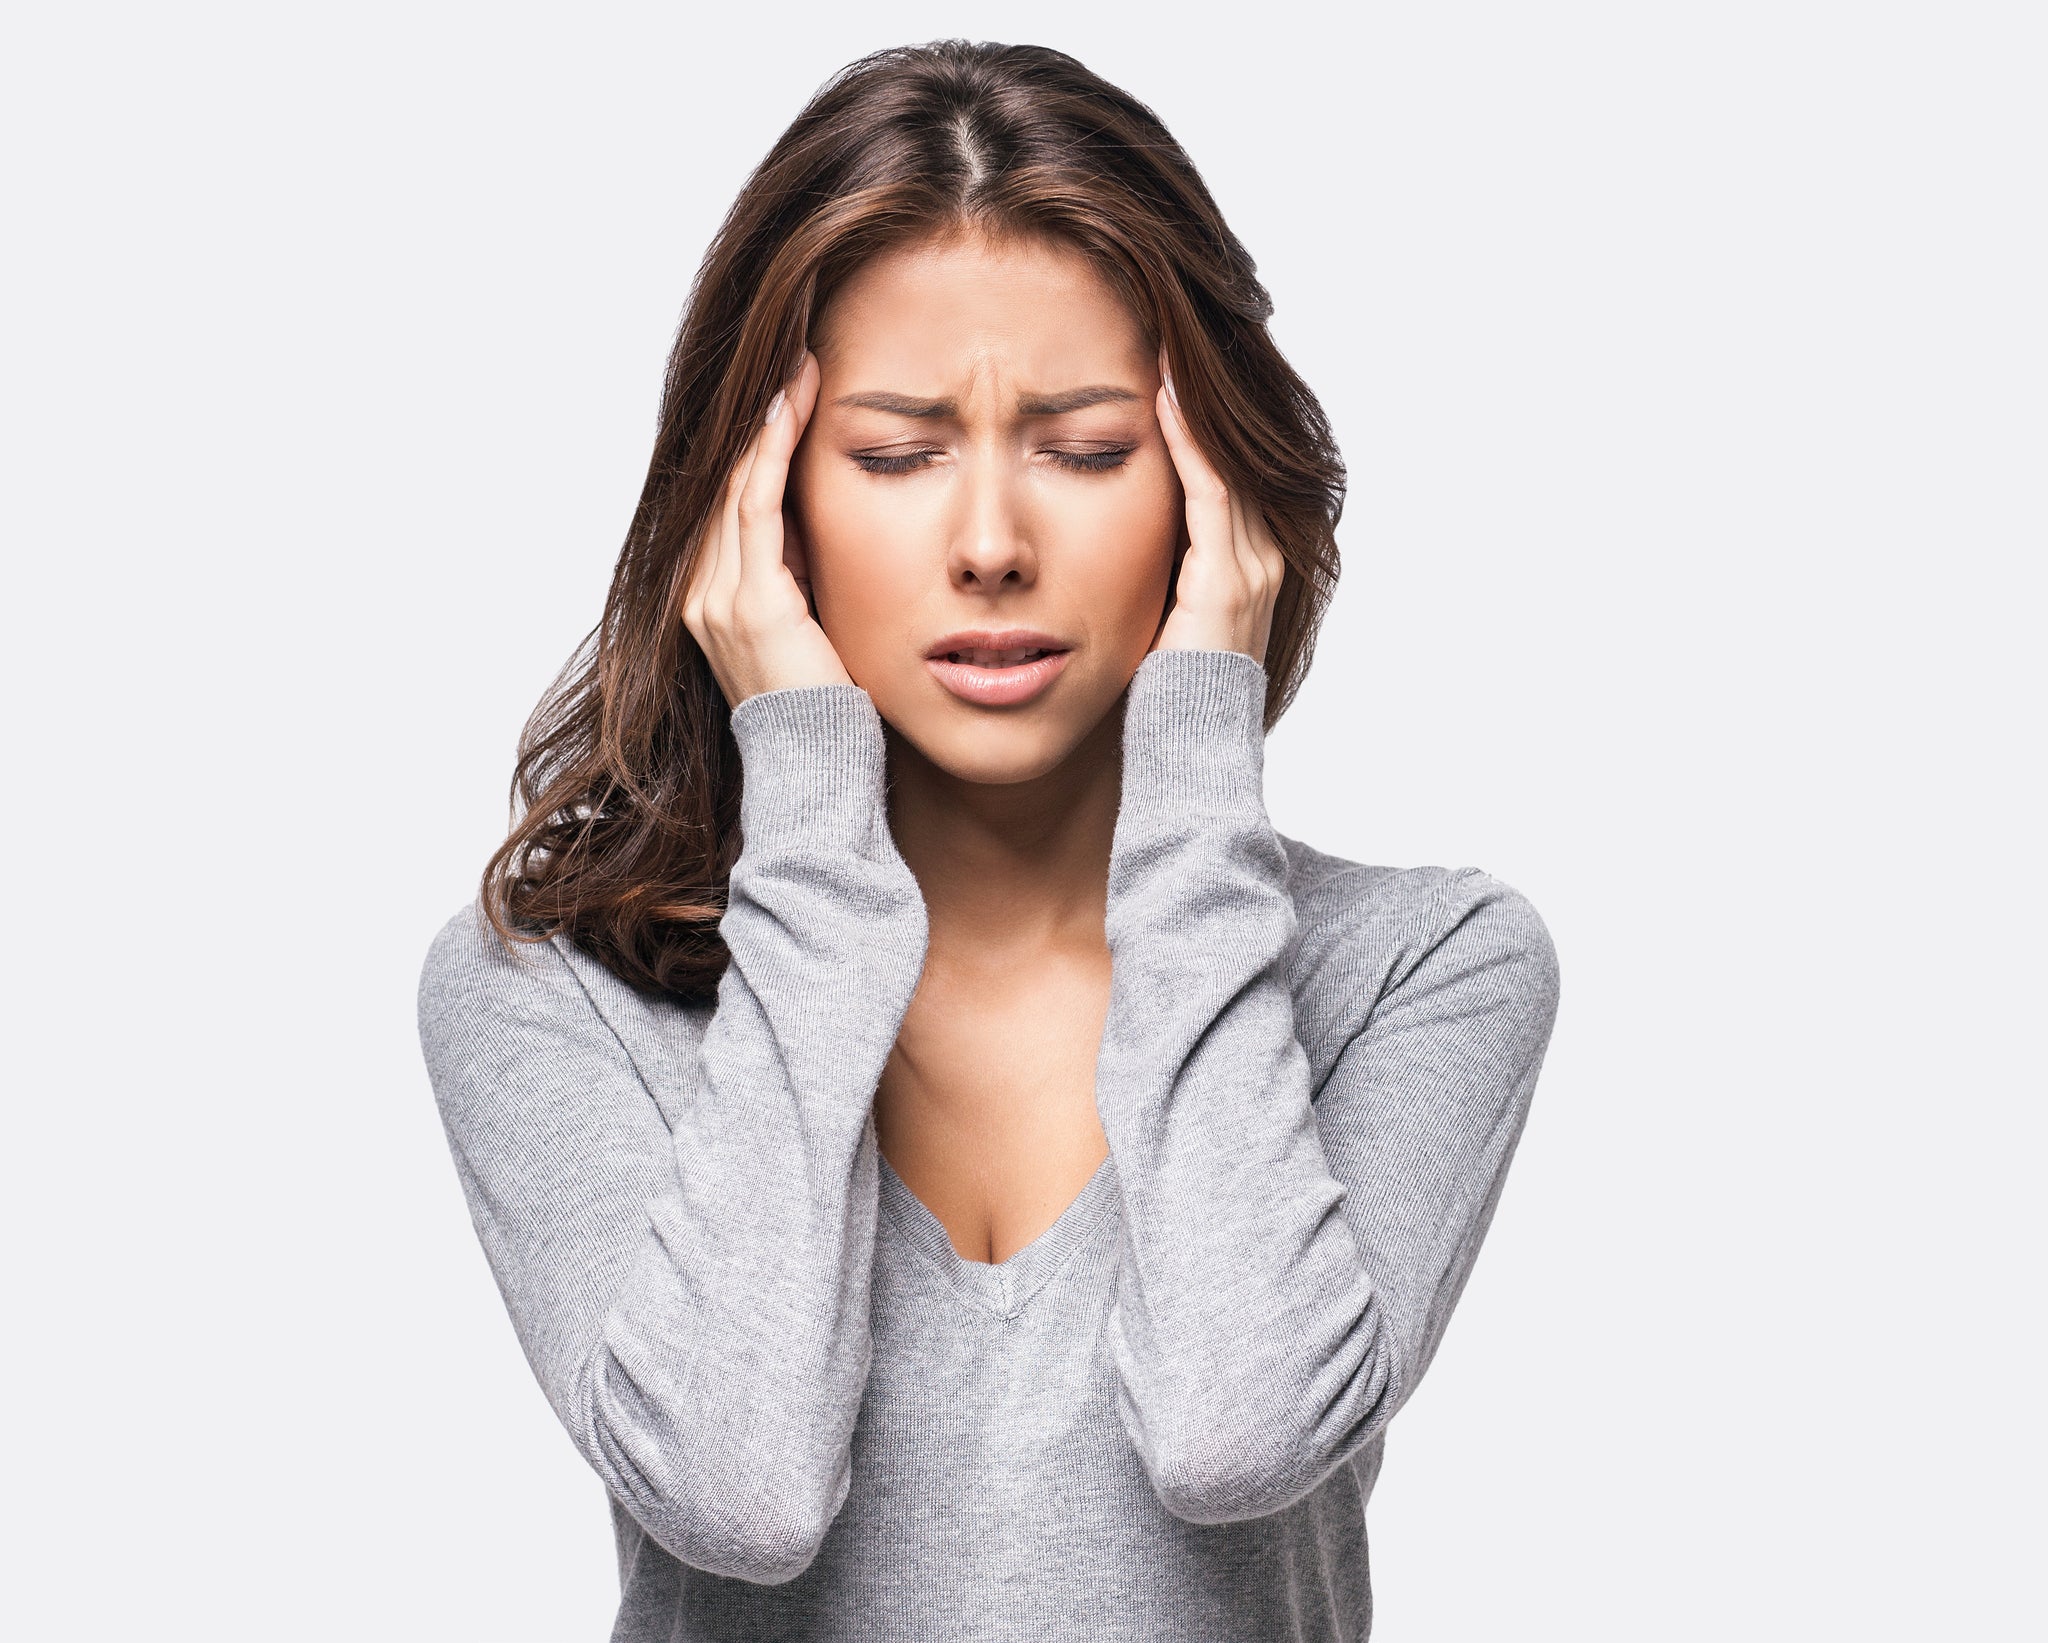 Top 10 Tips On How To Deal With Migraines Naturally